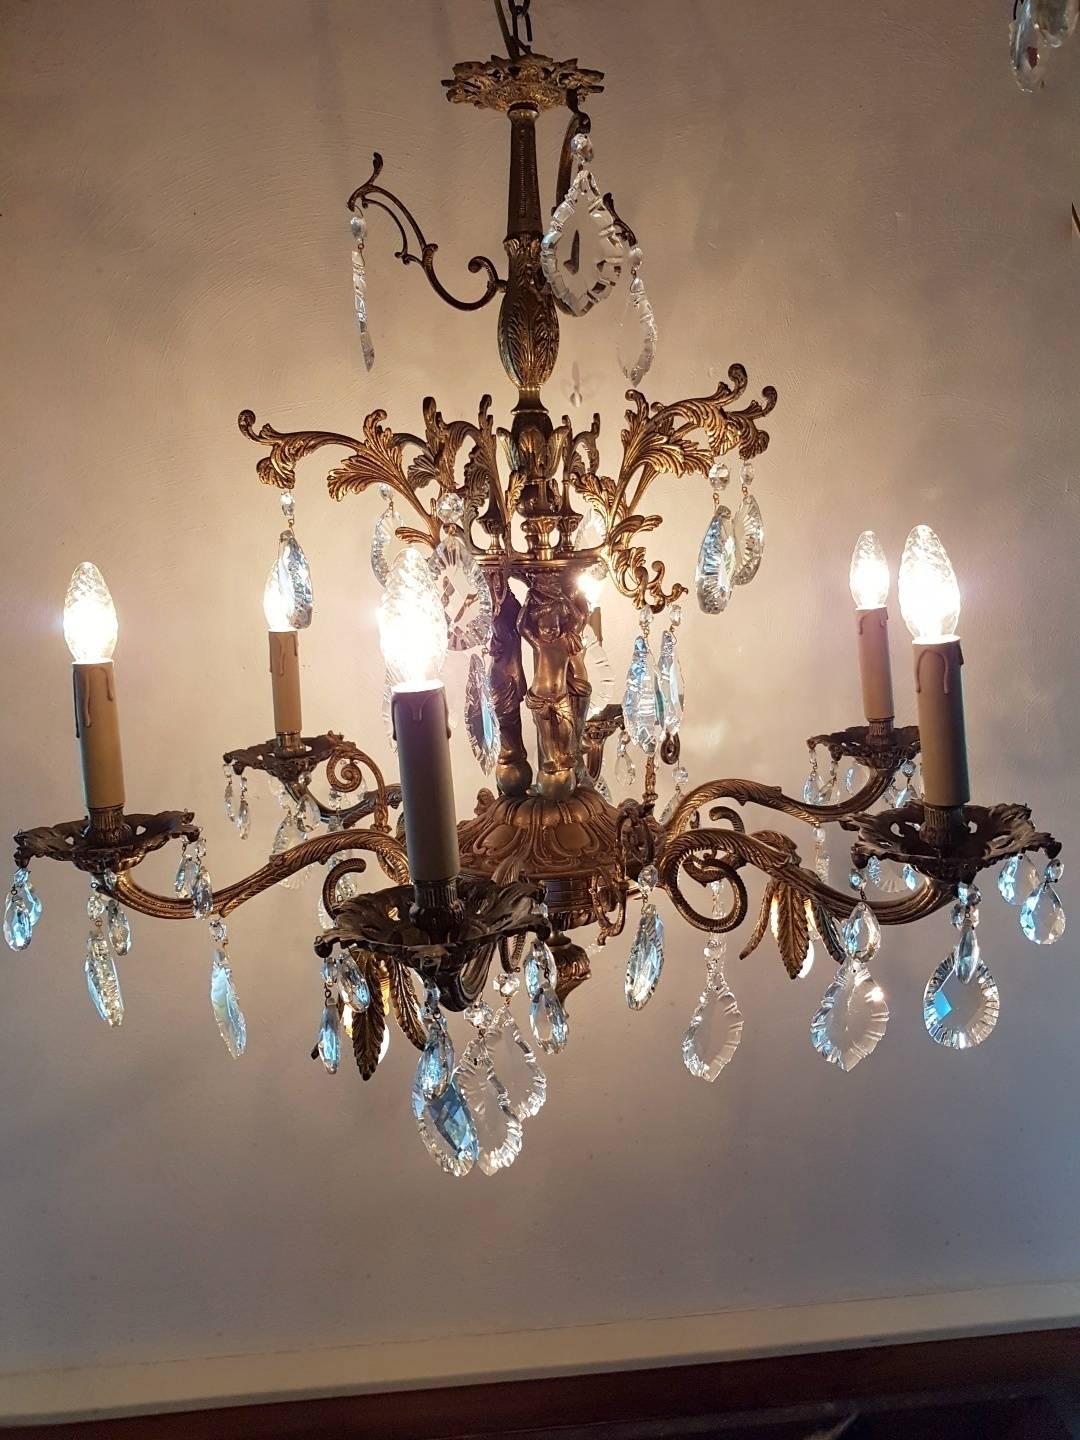 Spanish bronze chandelier with glass and nice ornaments. Three children are shown on the chandelier's frame. Six lights and three lights at the bottom.
This is just one of the collection of 1000 chandeliers, ceiling lamps and wall lightning.